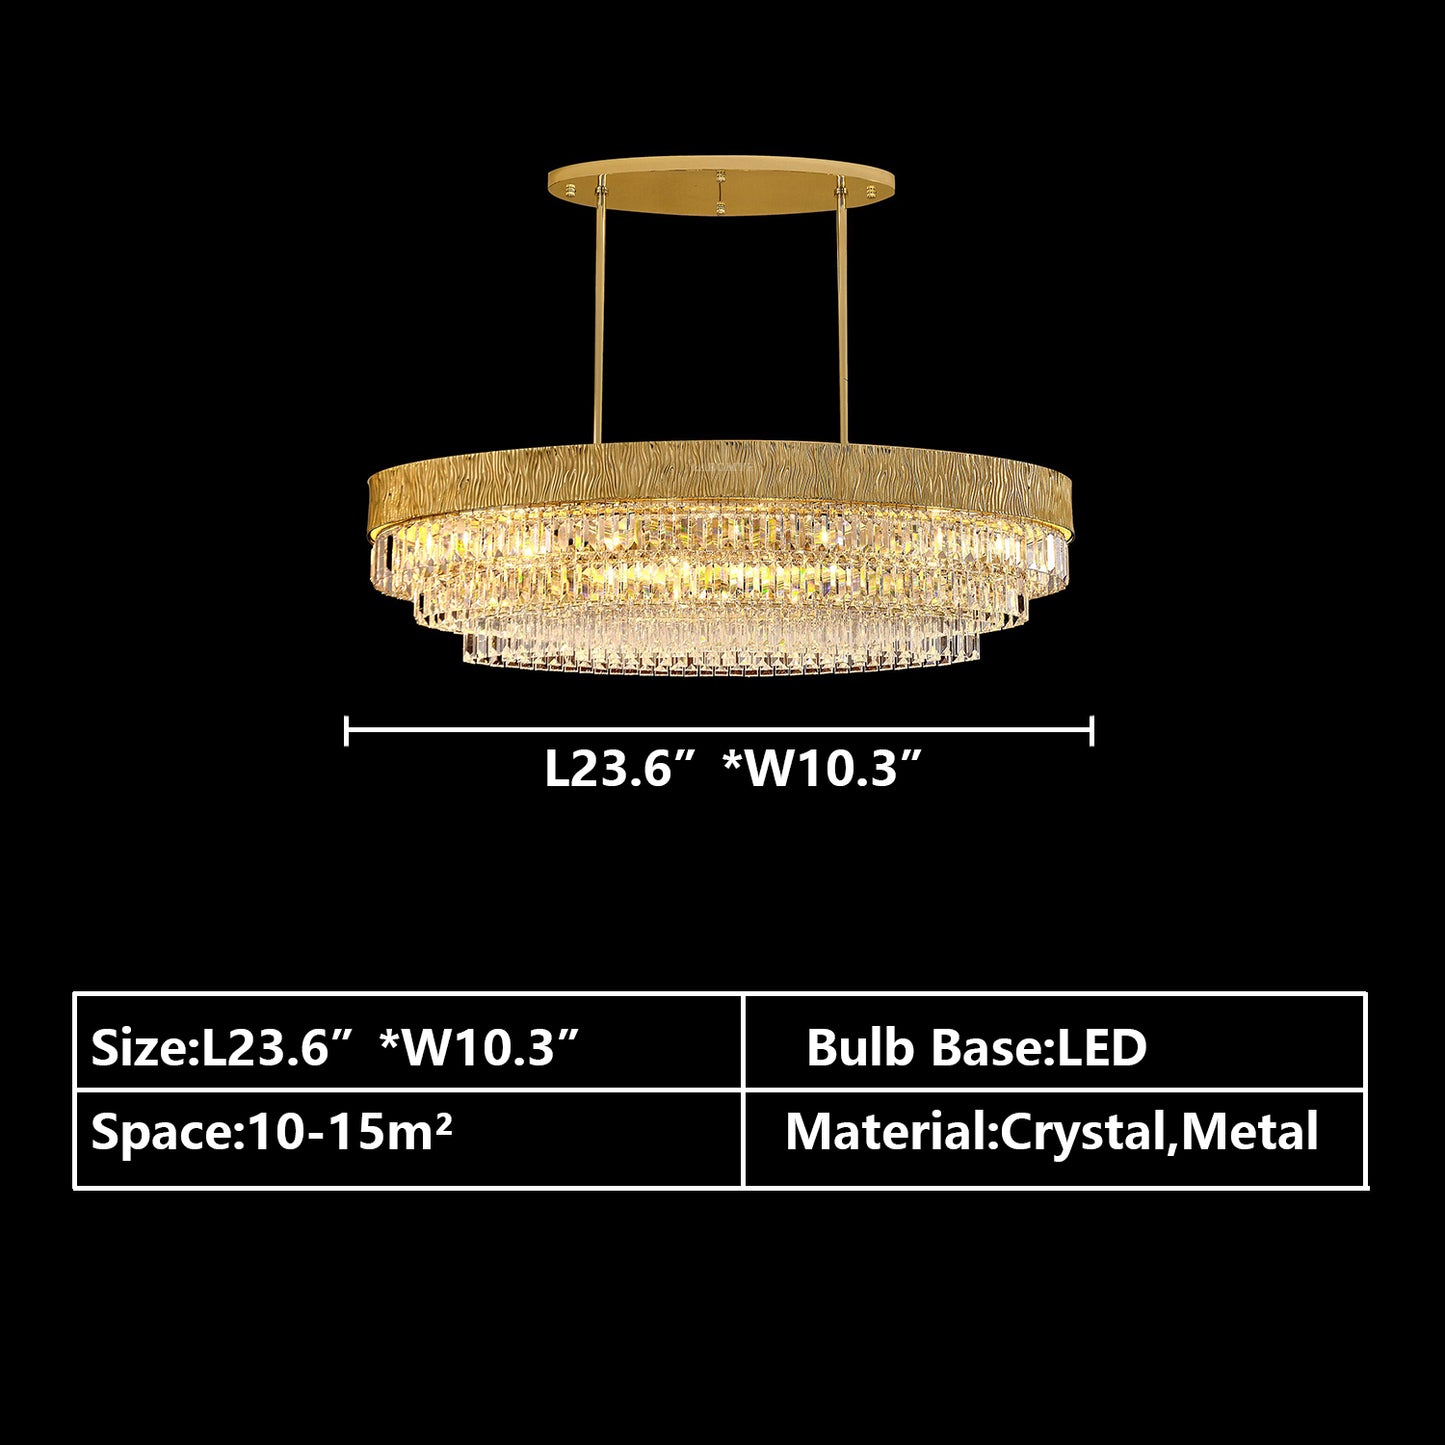 Oval:L23.6"*W10.3" chandelier,chandeliers,light,lamp,pendant,round,oval,tiers,layers,multi-tier,multi-layer,gold,luxury,light luxury,ceiling,chain,crystal,metal,living room,dining room,bedroom,dining table,bar,hallway